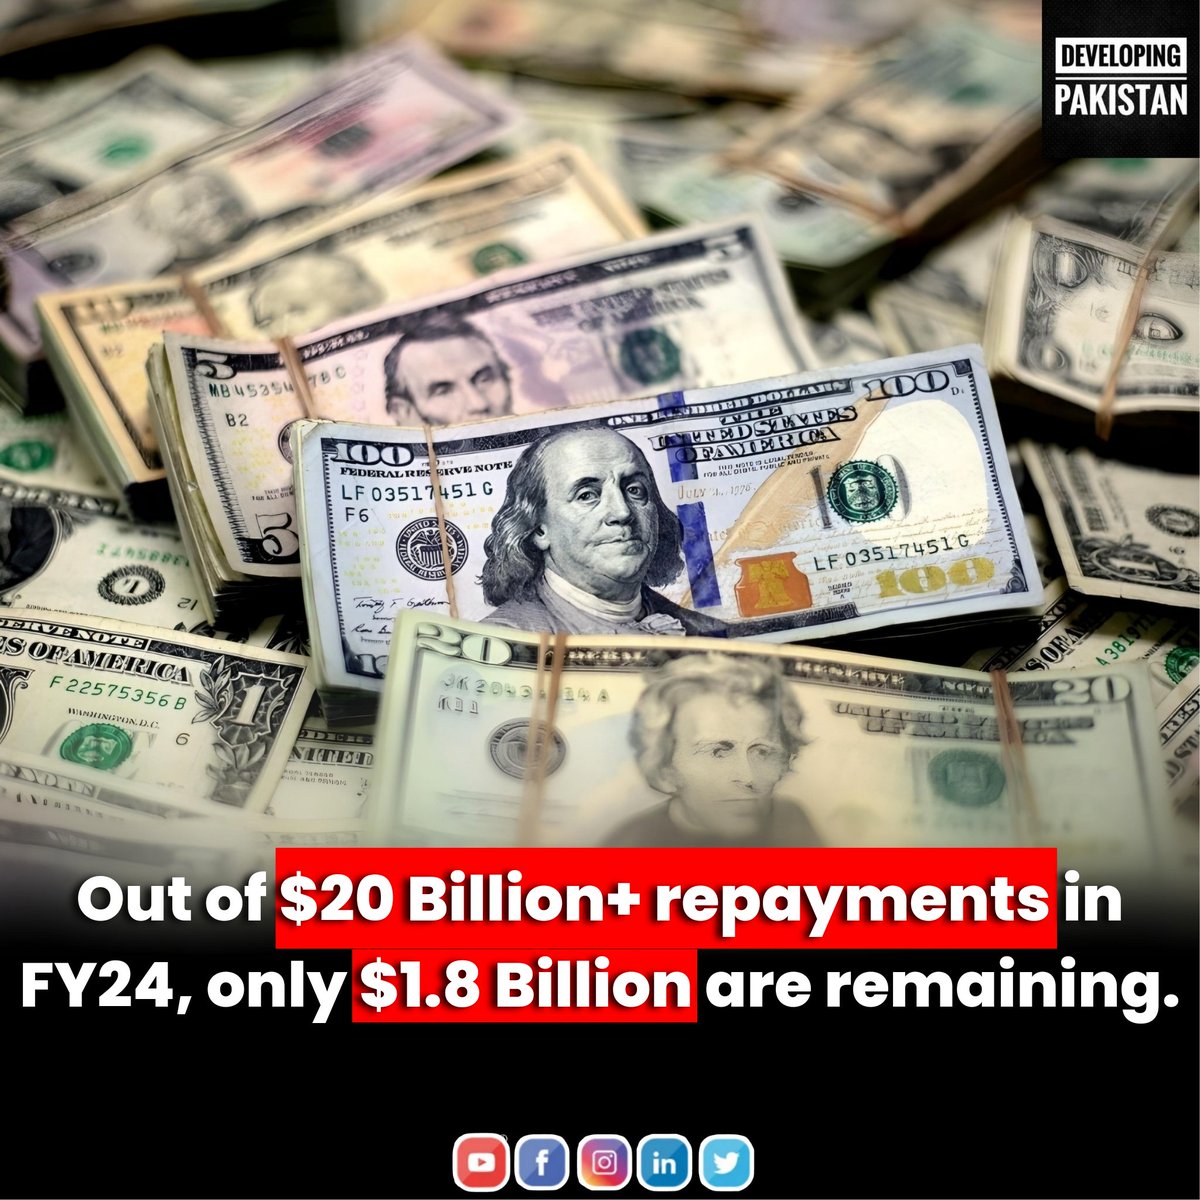 Out of $20Bn+ repayments in FY24, only $1.8Bn are remaining.

🇵🇰🇵🇰 $$ reserves will increase to $9Bn in next few days & it is our target to maintain them at this level until 30th June 2024.

Comments by State Bank Governor

#Pakistan #StateBank #StateBankofPakistan 🇵🇰 🇵🇰